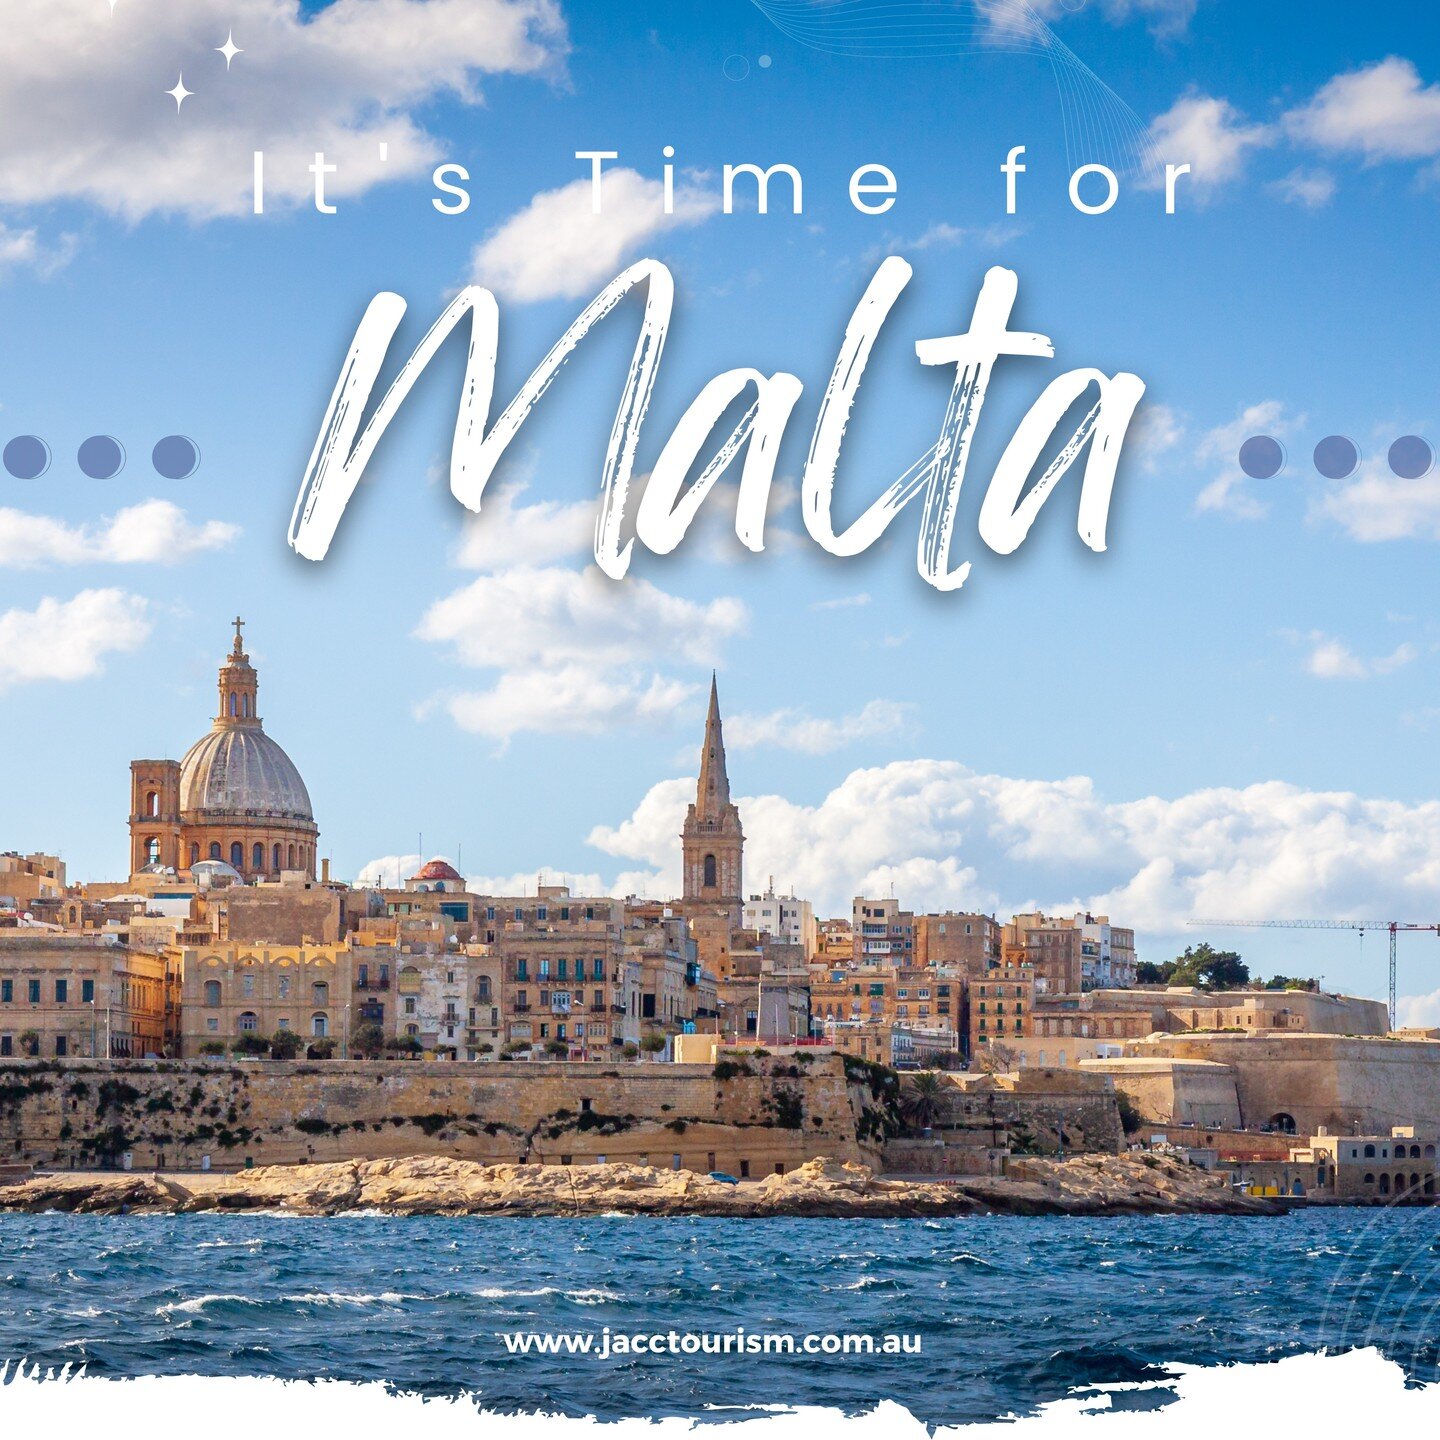 Malta is a Mediterranean island country located just south of Sicily, Italy.

It's known for its beautiful beaches and architecture, as well as its historical role as a major trading hub in the Mediterranean.

Malta offers plenty to see and do&mdash;